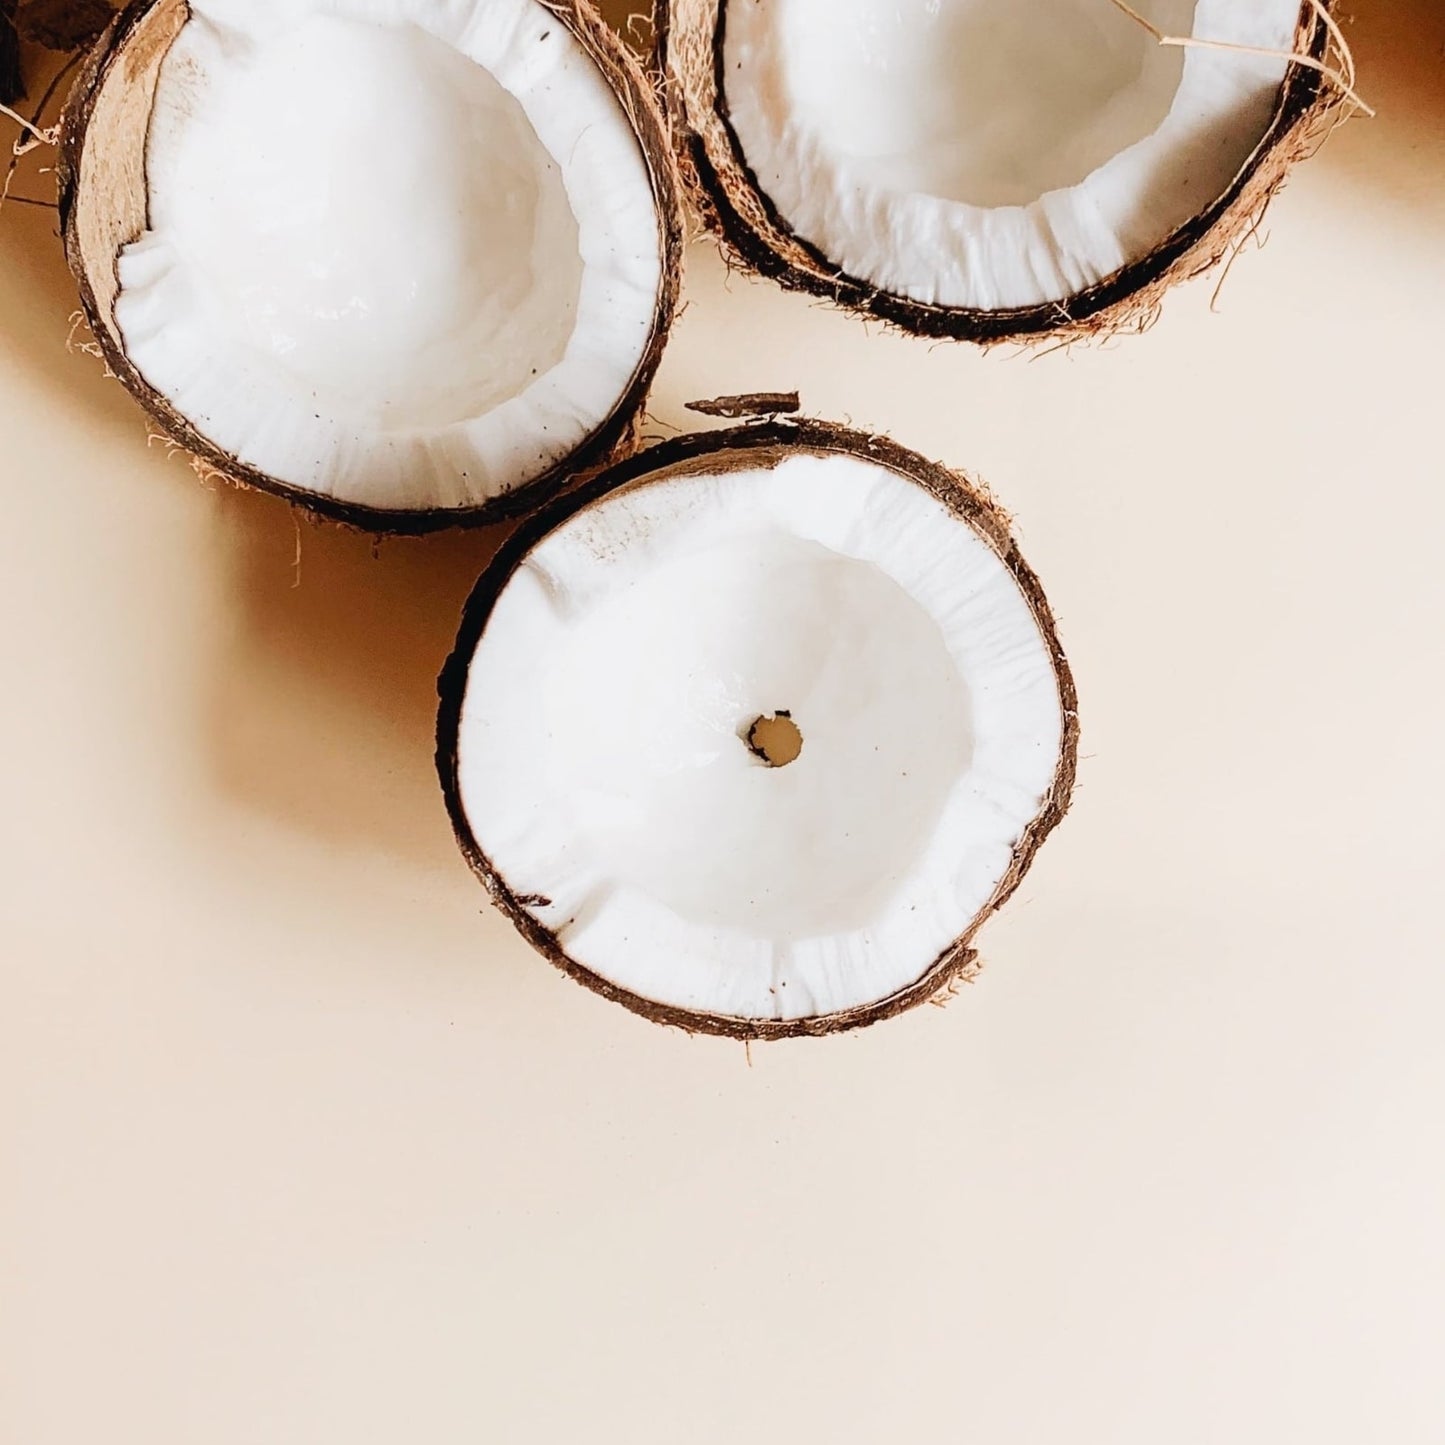 A top-down view of halved coconuts on a beige background, illustrating the natural source of Monolaurin, a substance derived from coconut oil with potential antimicrobial properties.